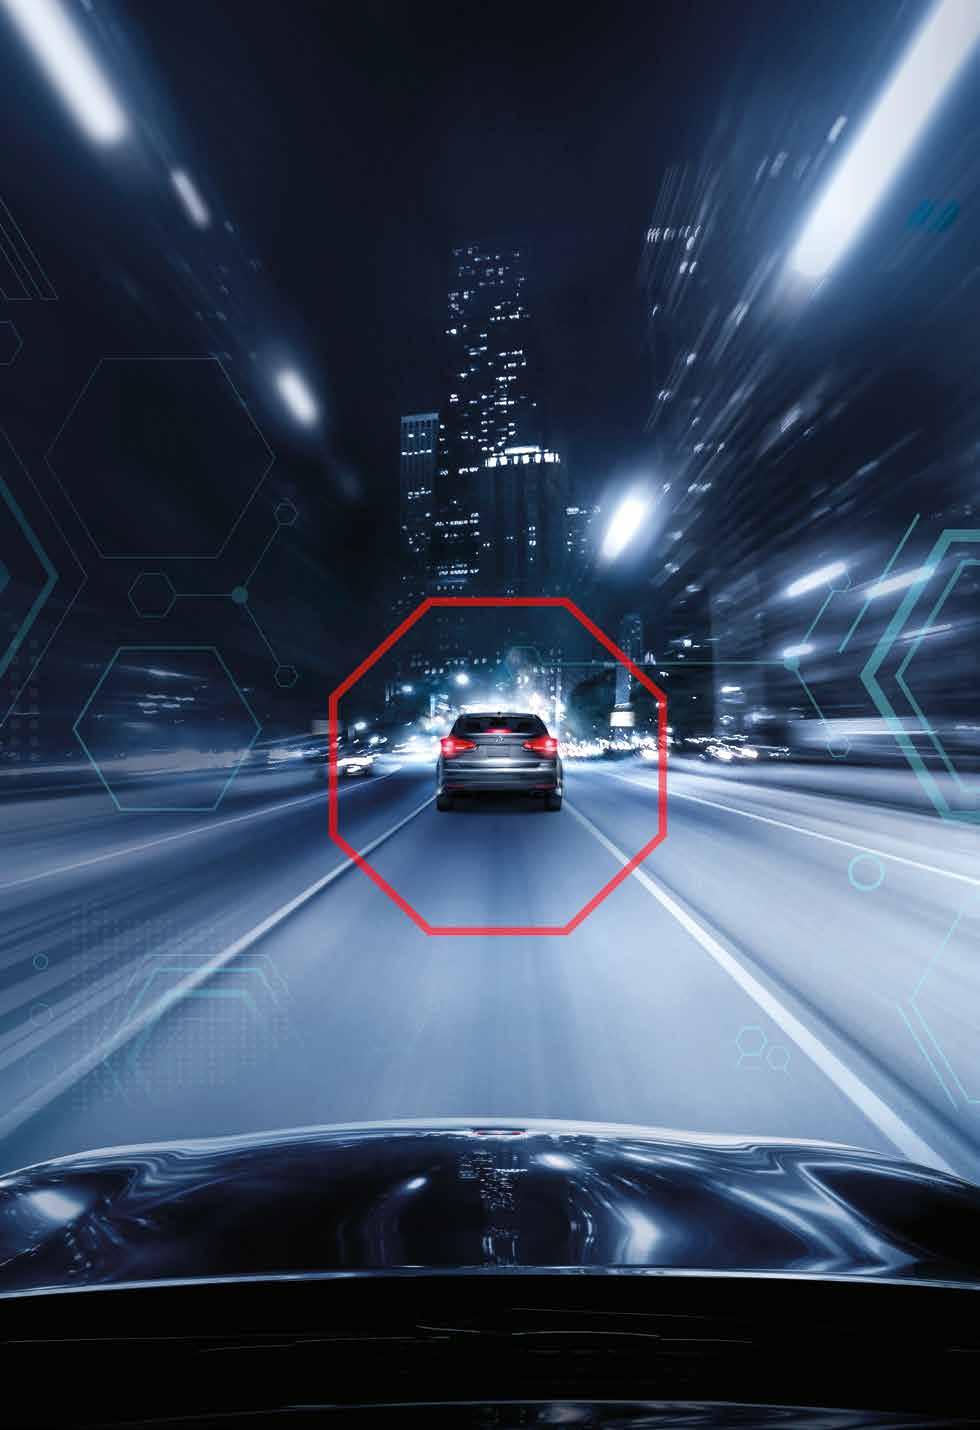 KIA.CA/SPORTAGE BRAKING ASSISTANCE Senses, alerts and helps you STOP It s like having a co-pilot always on the lookout with these advanced features.